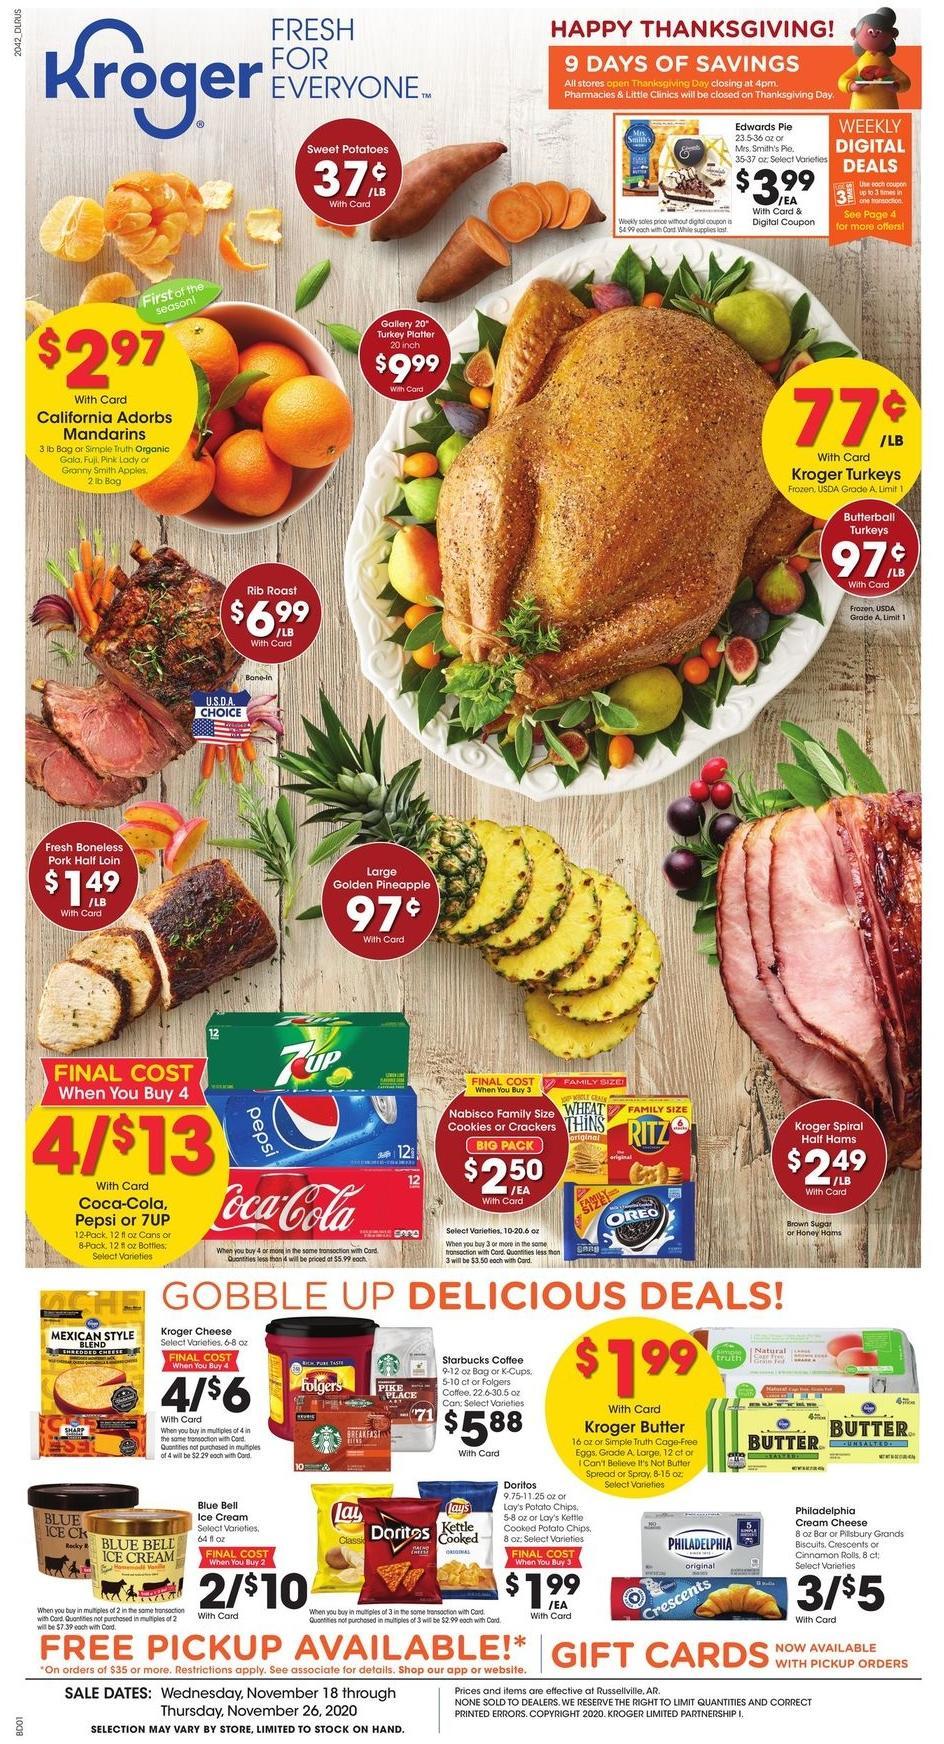 Kroger Weekly Ads & Special Buys from November 18